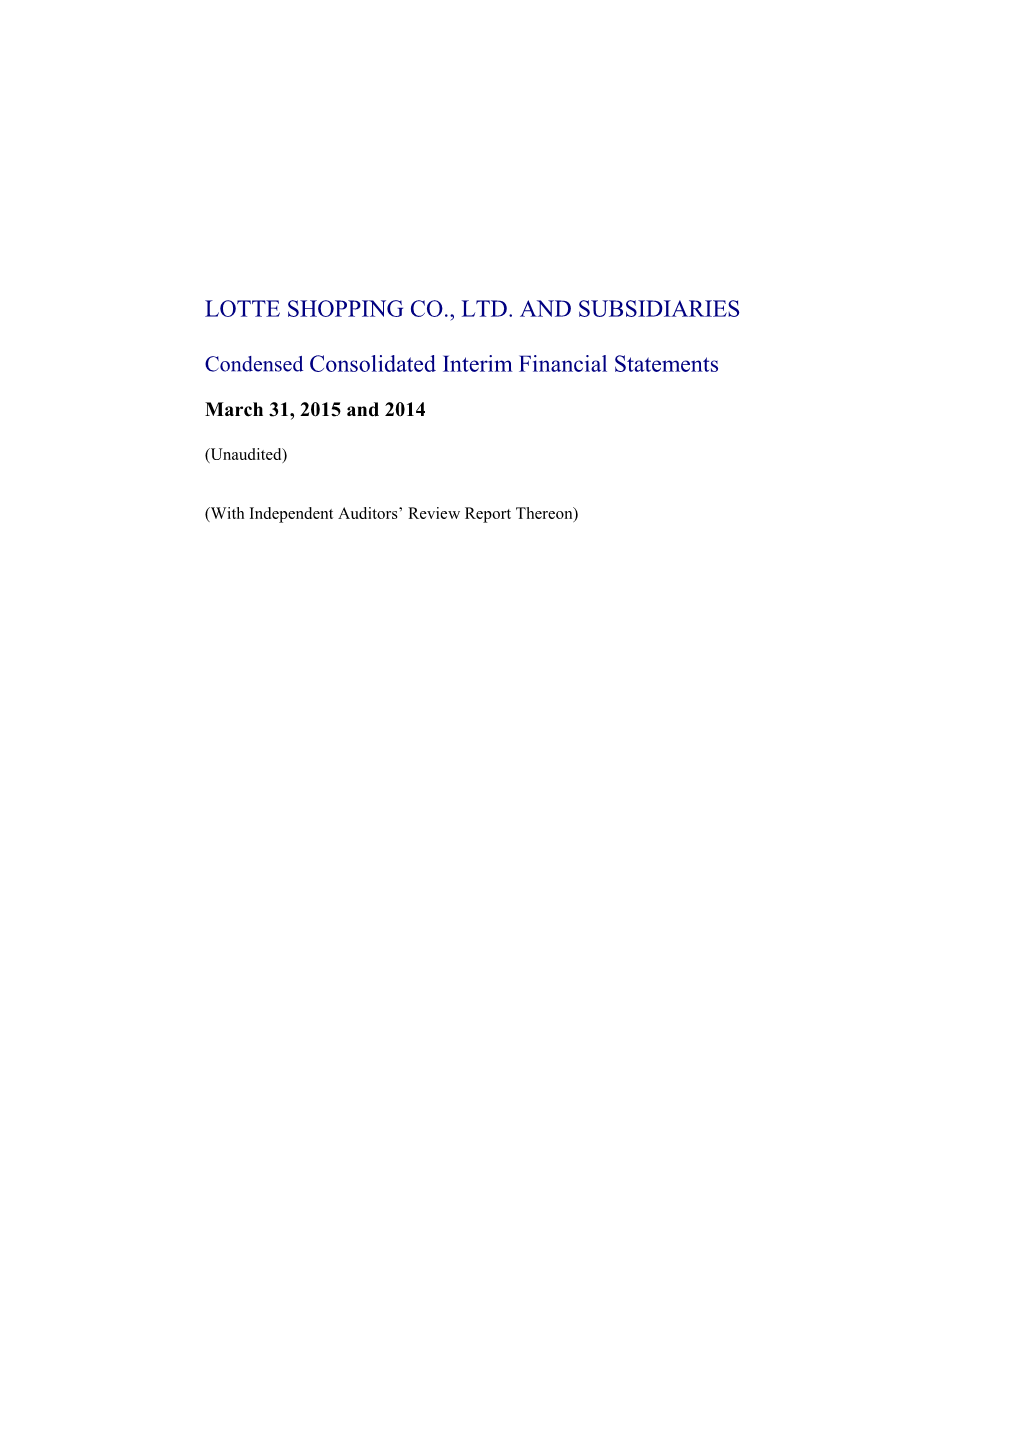 LOTTE SHOPPING CO., LTD. and SUBSIDIARIES Condensed Consolidated Interim Financial Statements